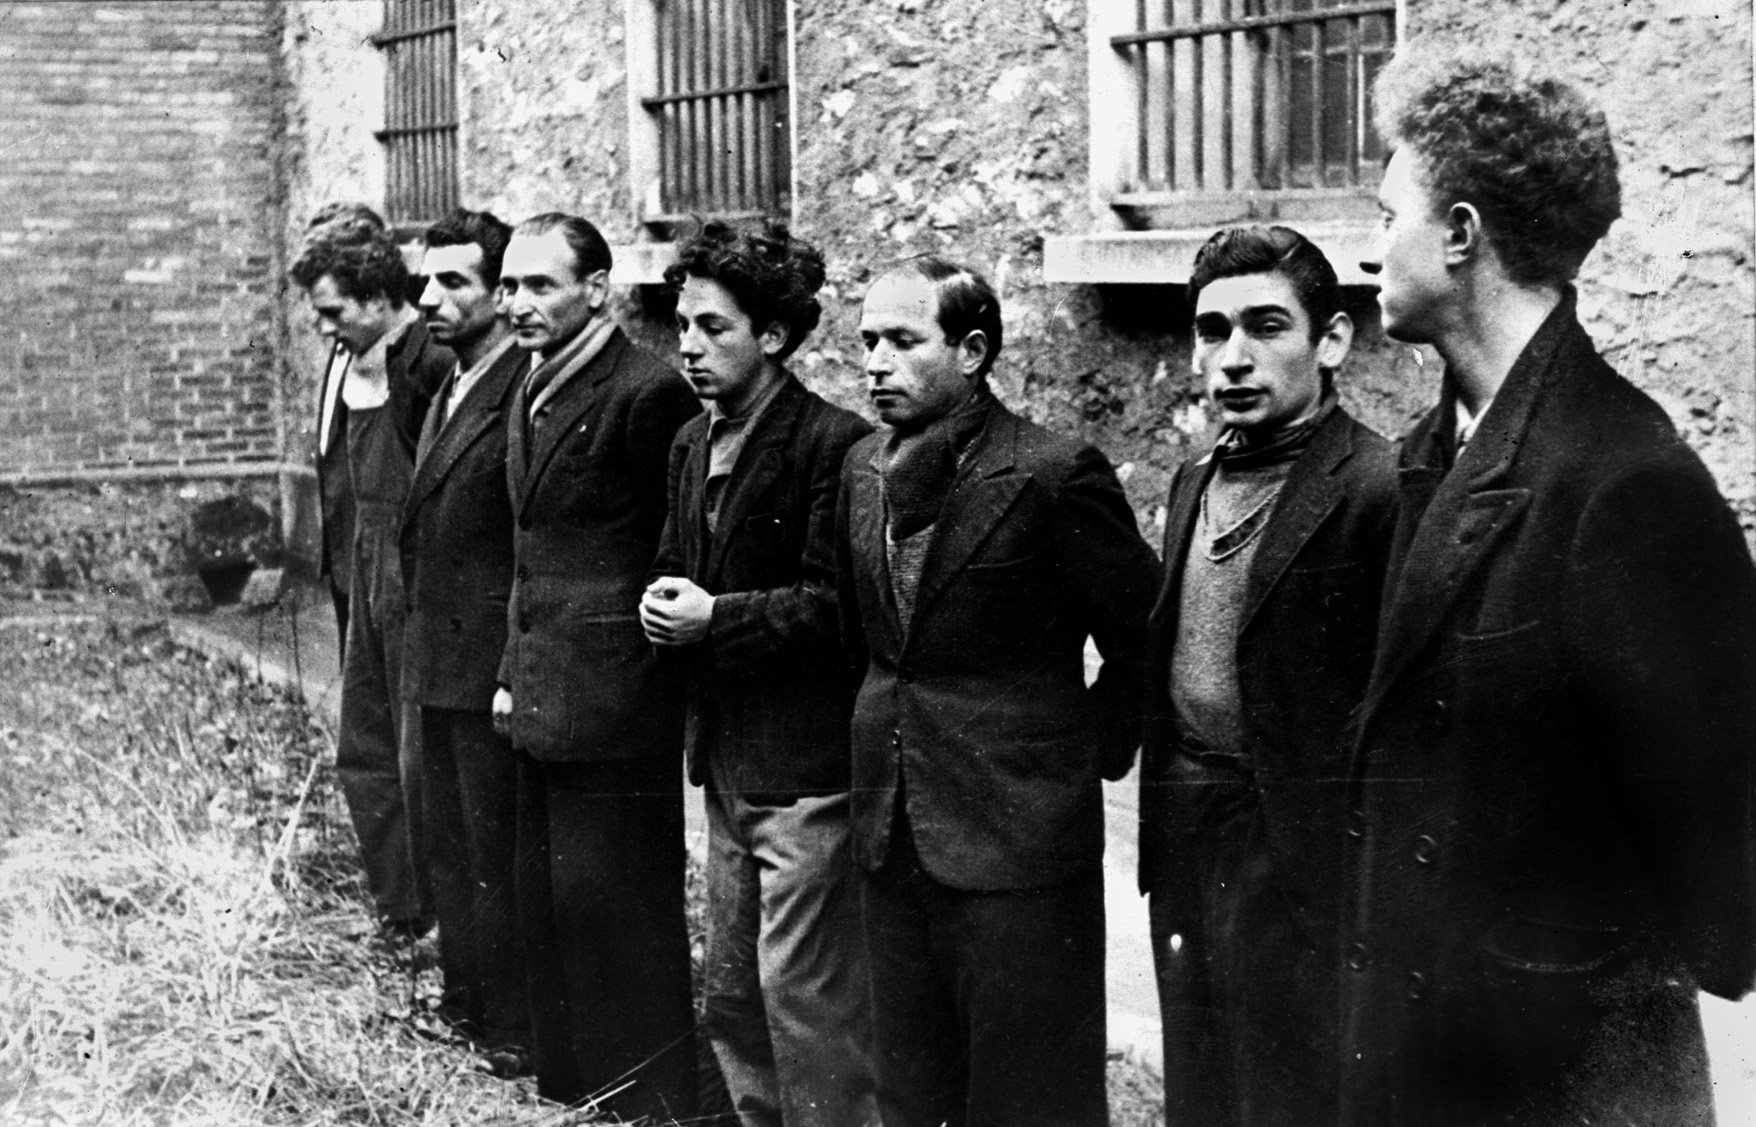 Sentenced to die: 7 members of the Manouchian Group, an armed resistance organization in the Paris area, await their execution, February 21, 1944. Missak Manouchian (second from left) led the communist-affiliated organization.